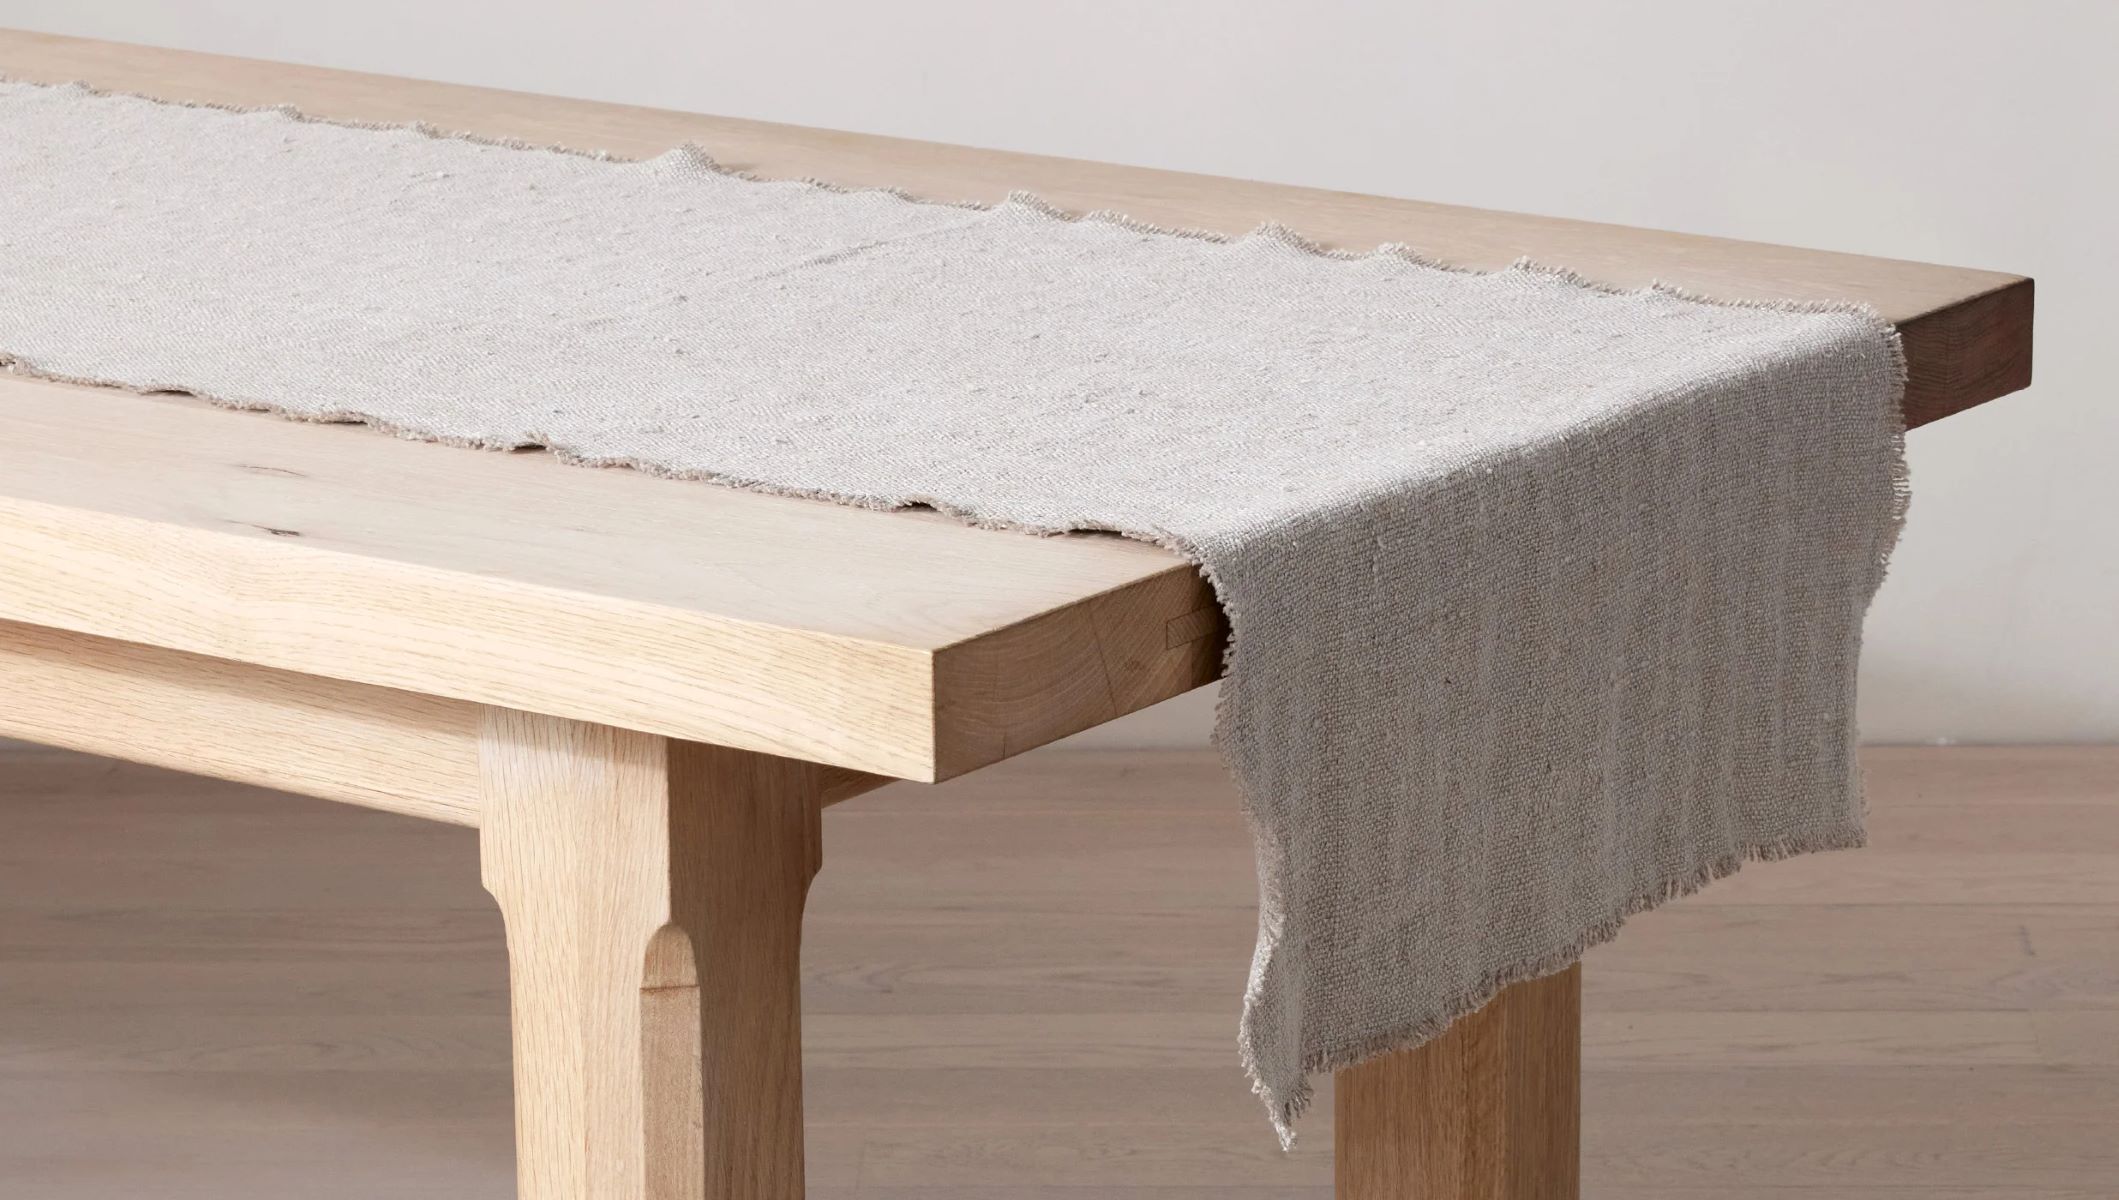 Table Runner Review: The Perfect Addition to Your Home Décor